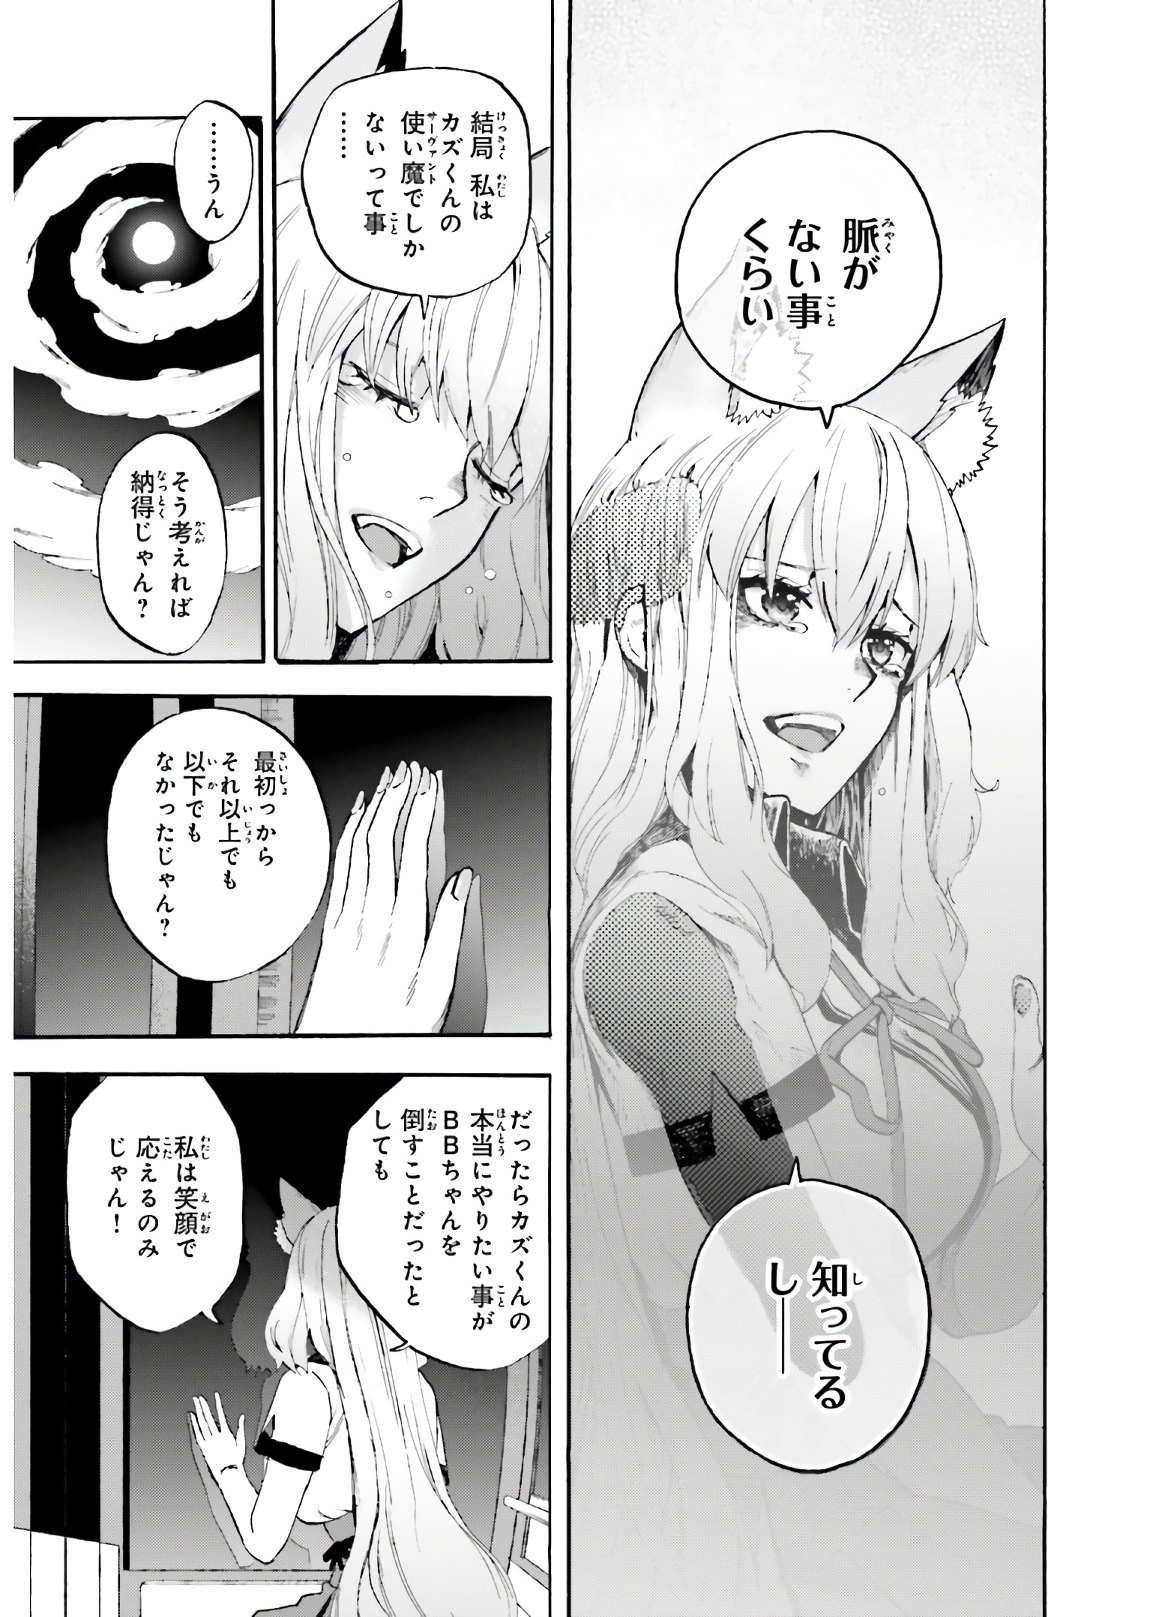 Fate/Extra CCC Fox Tail - Chapter 63 - Page 3